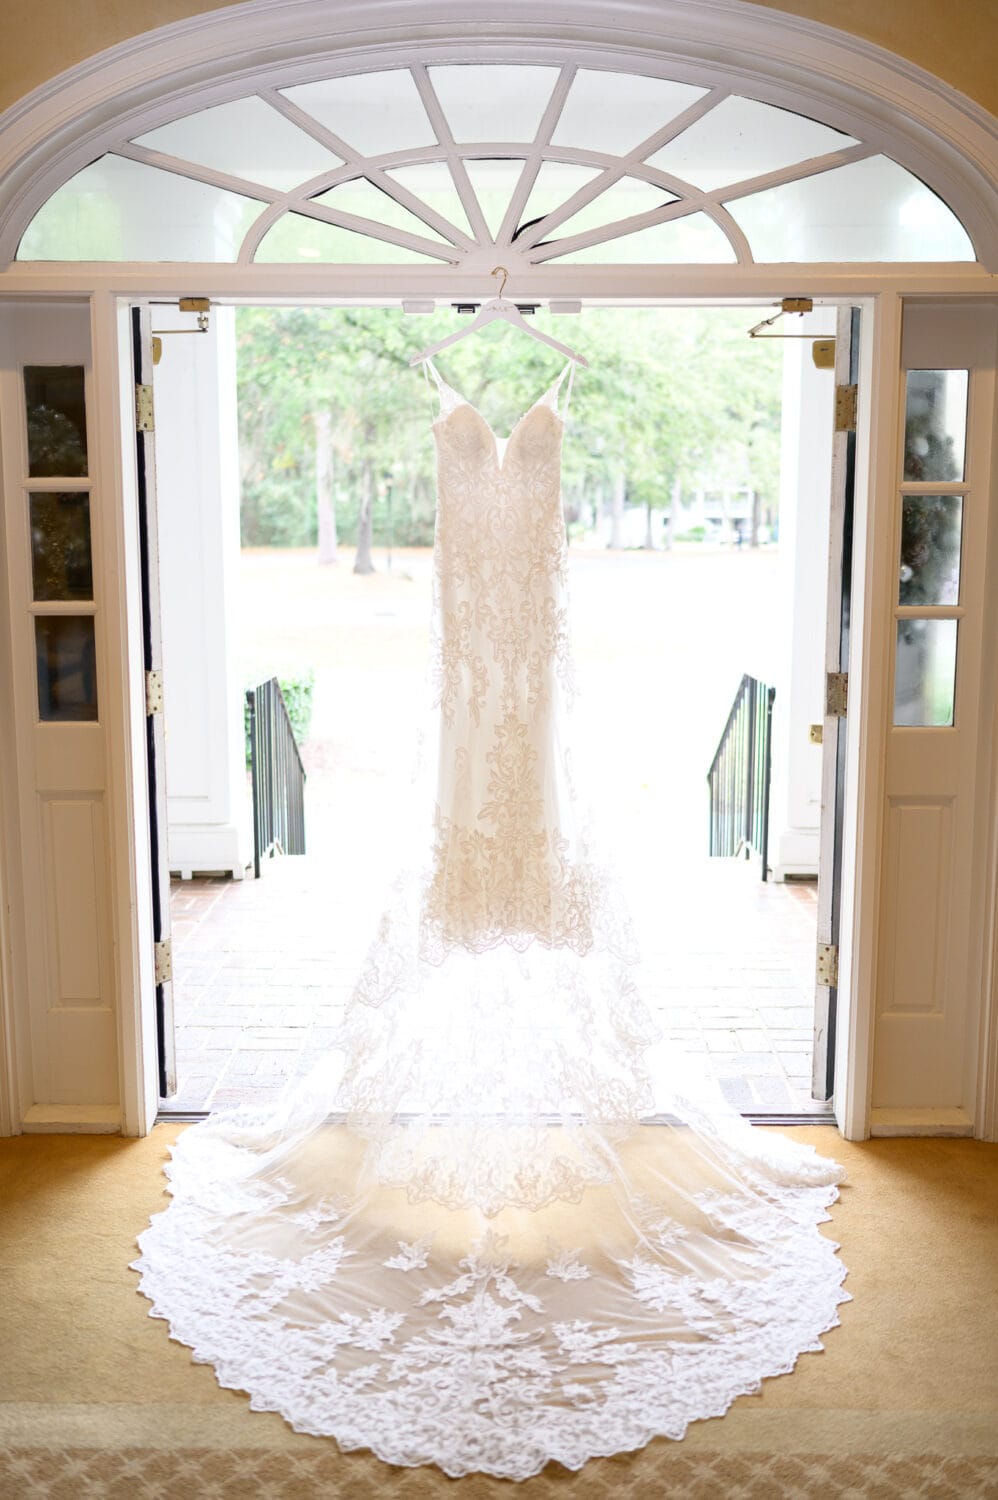 Dress hanging in the doorway - Pawleys Plantation Golf & Country Club